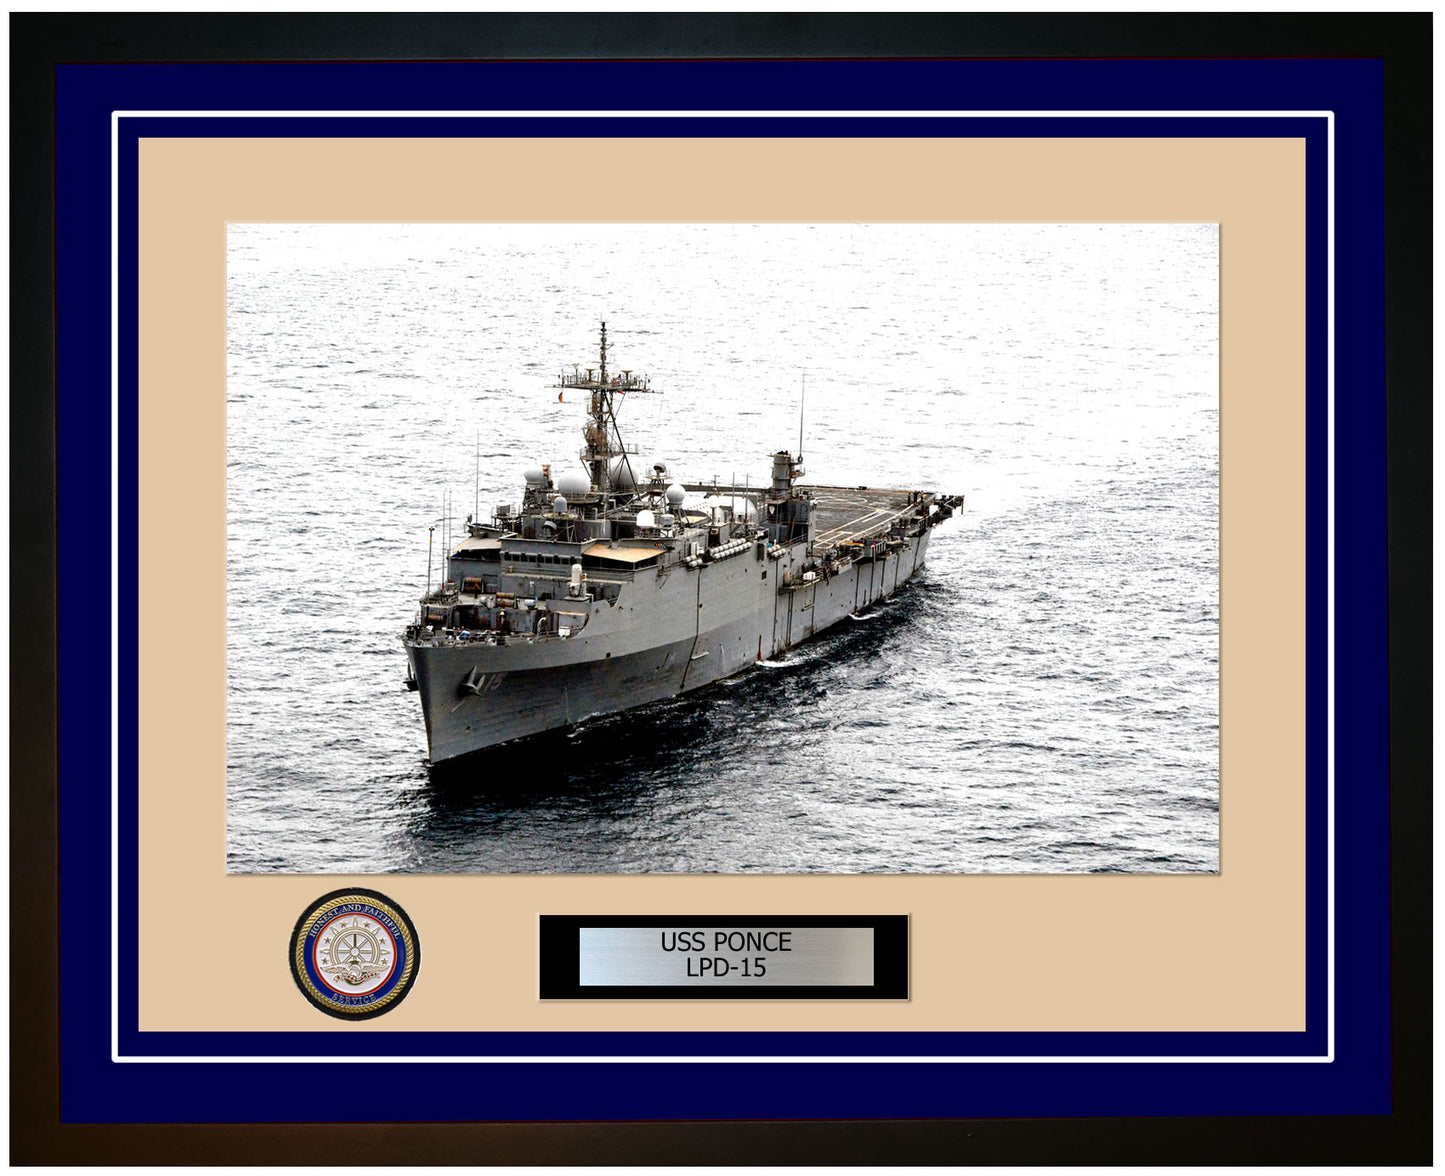 USS Ponce LPD-15 Framed Navy Ship Photo Blue